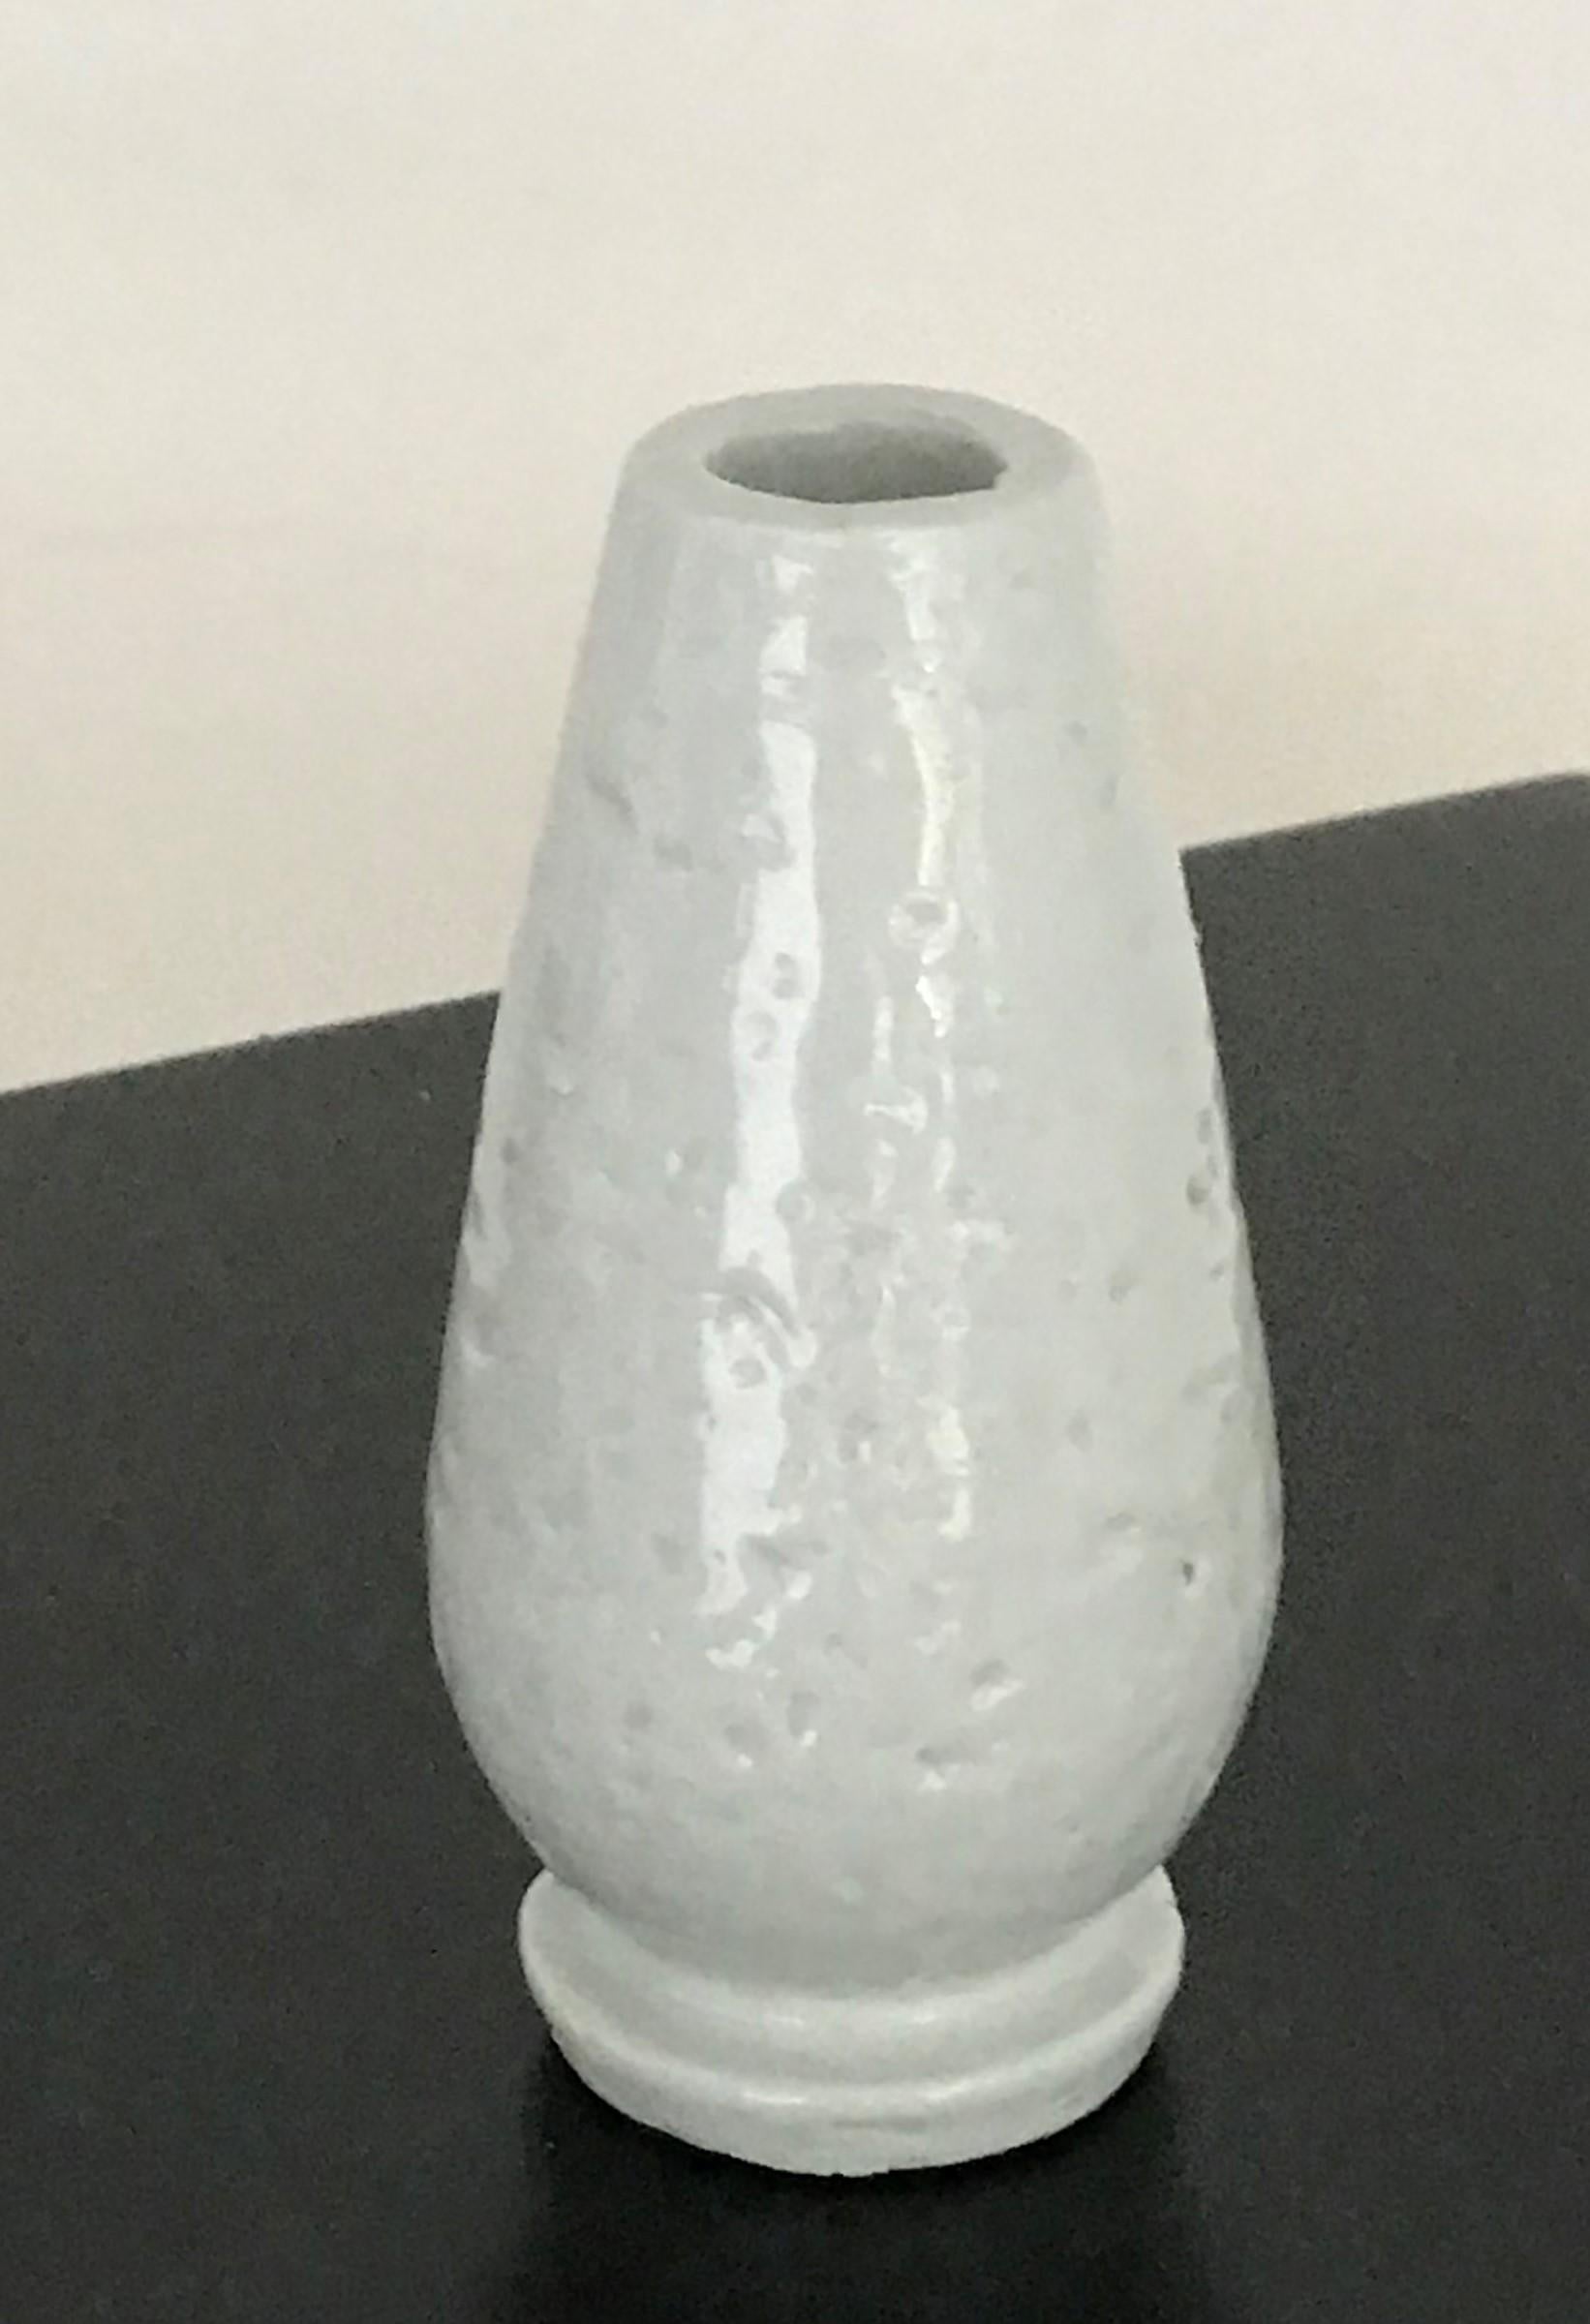 REDUCED FROM $280....Exquisite creation by Gunnar Nylund (1914–1997) during his tenure as artistic director of Rörstrand from 1932 through the 1950s. The vase has a glossy white glaze over a rough rustic body creating a smooth touch but a brutal